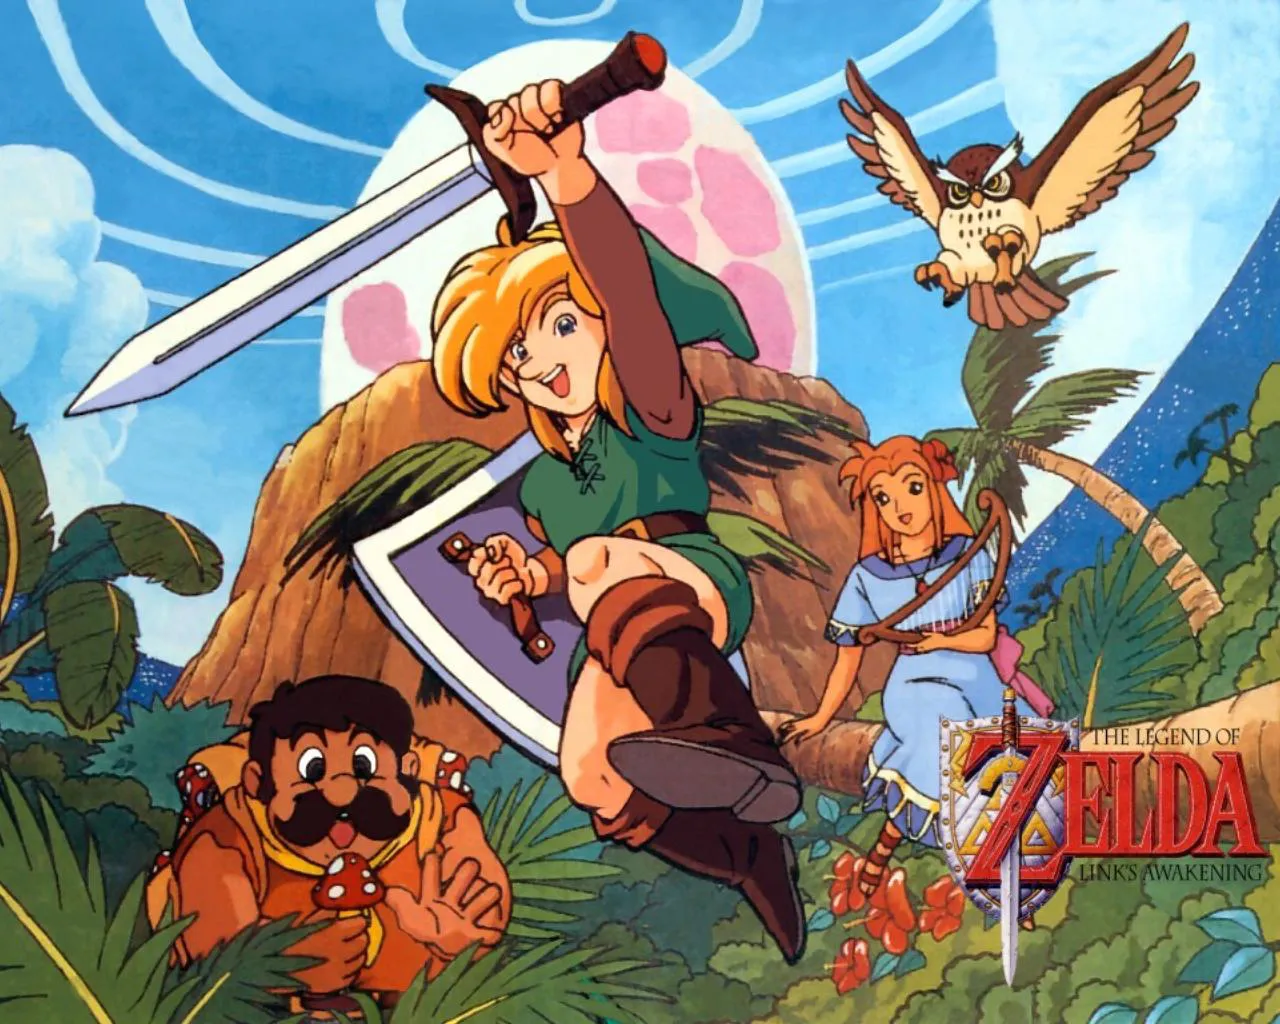 Which Version Of Zelda: Link's Awakening Is Your Favourite